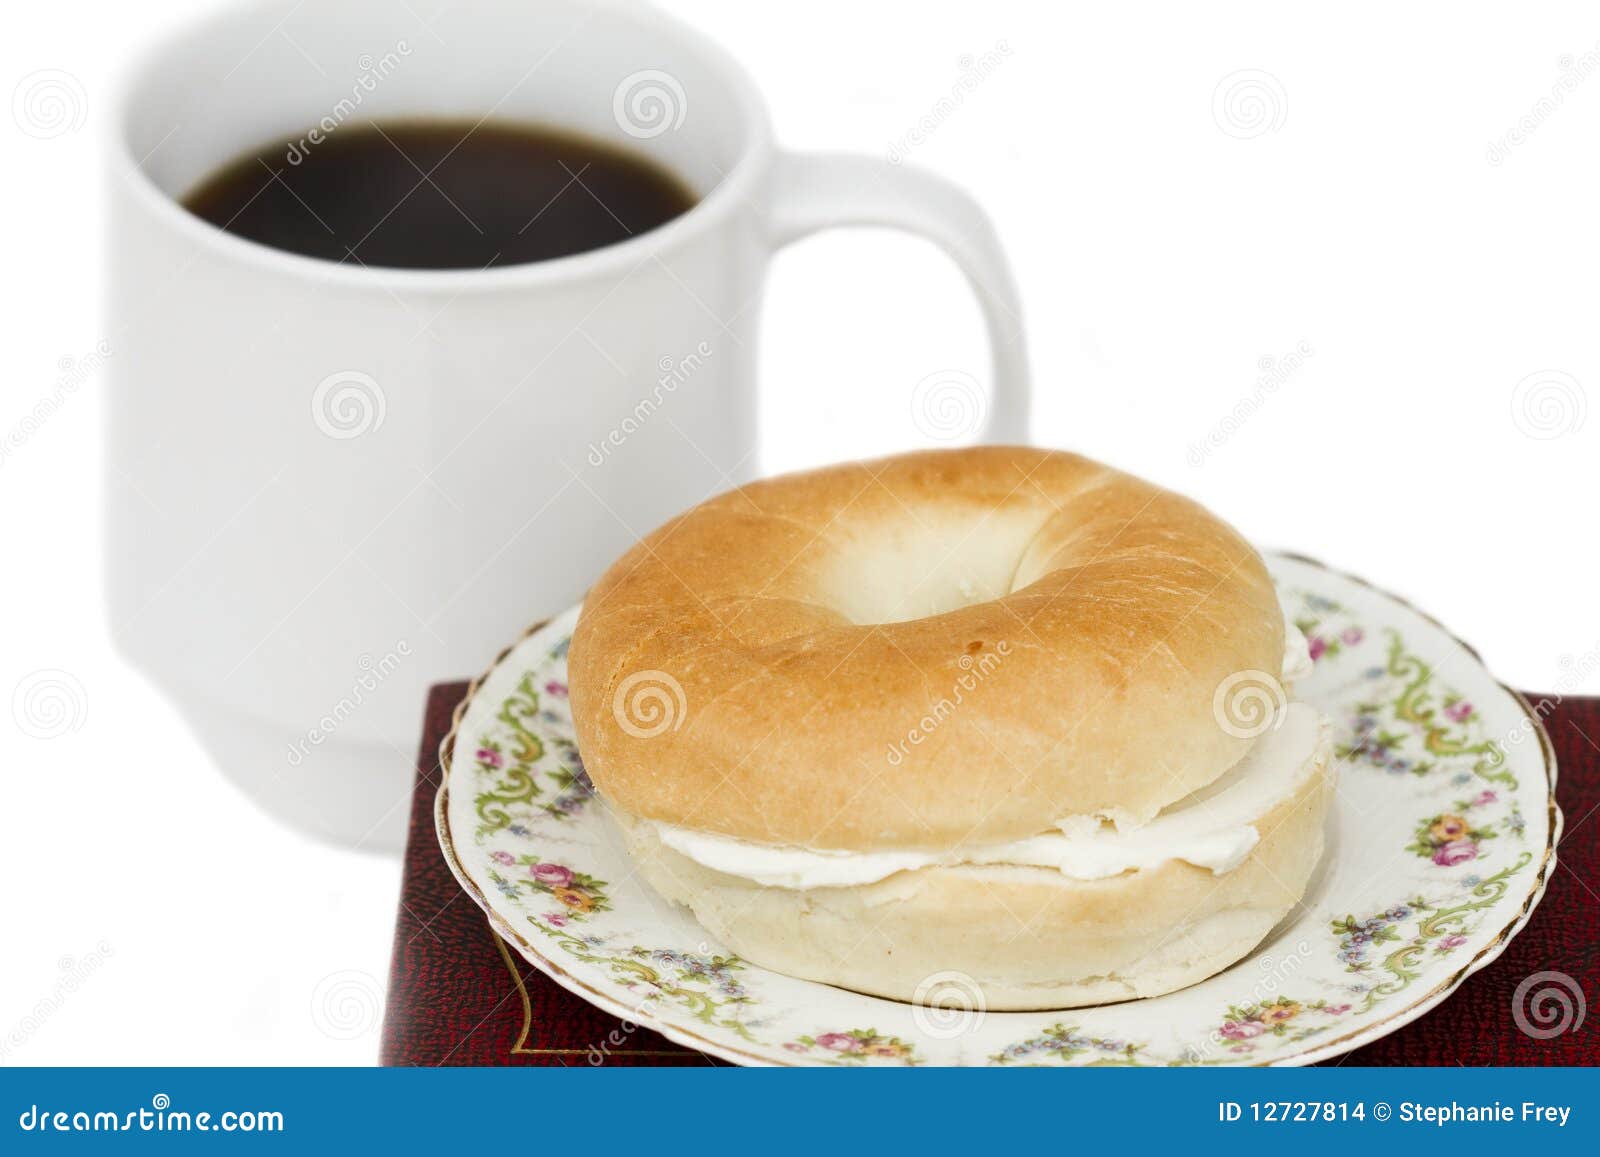 clipart bagels and coffee - photo #9